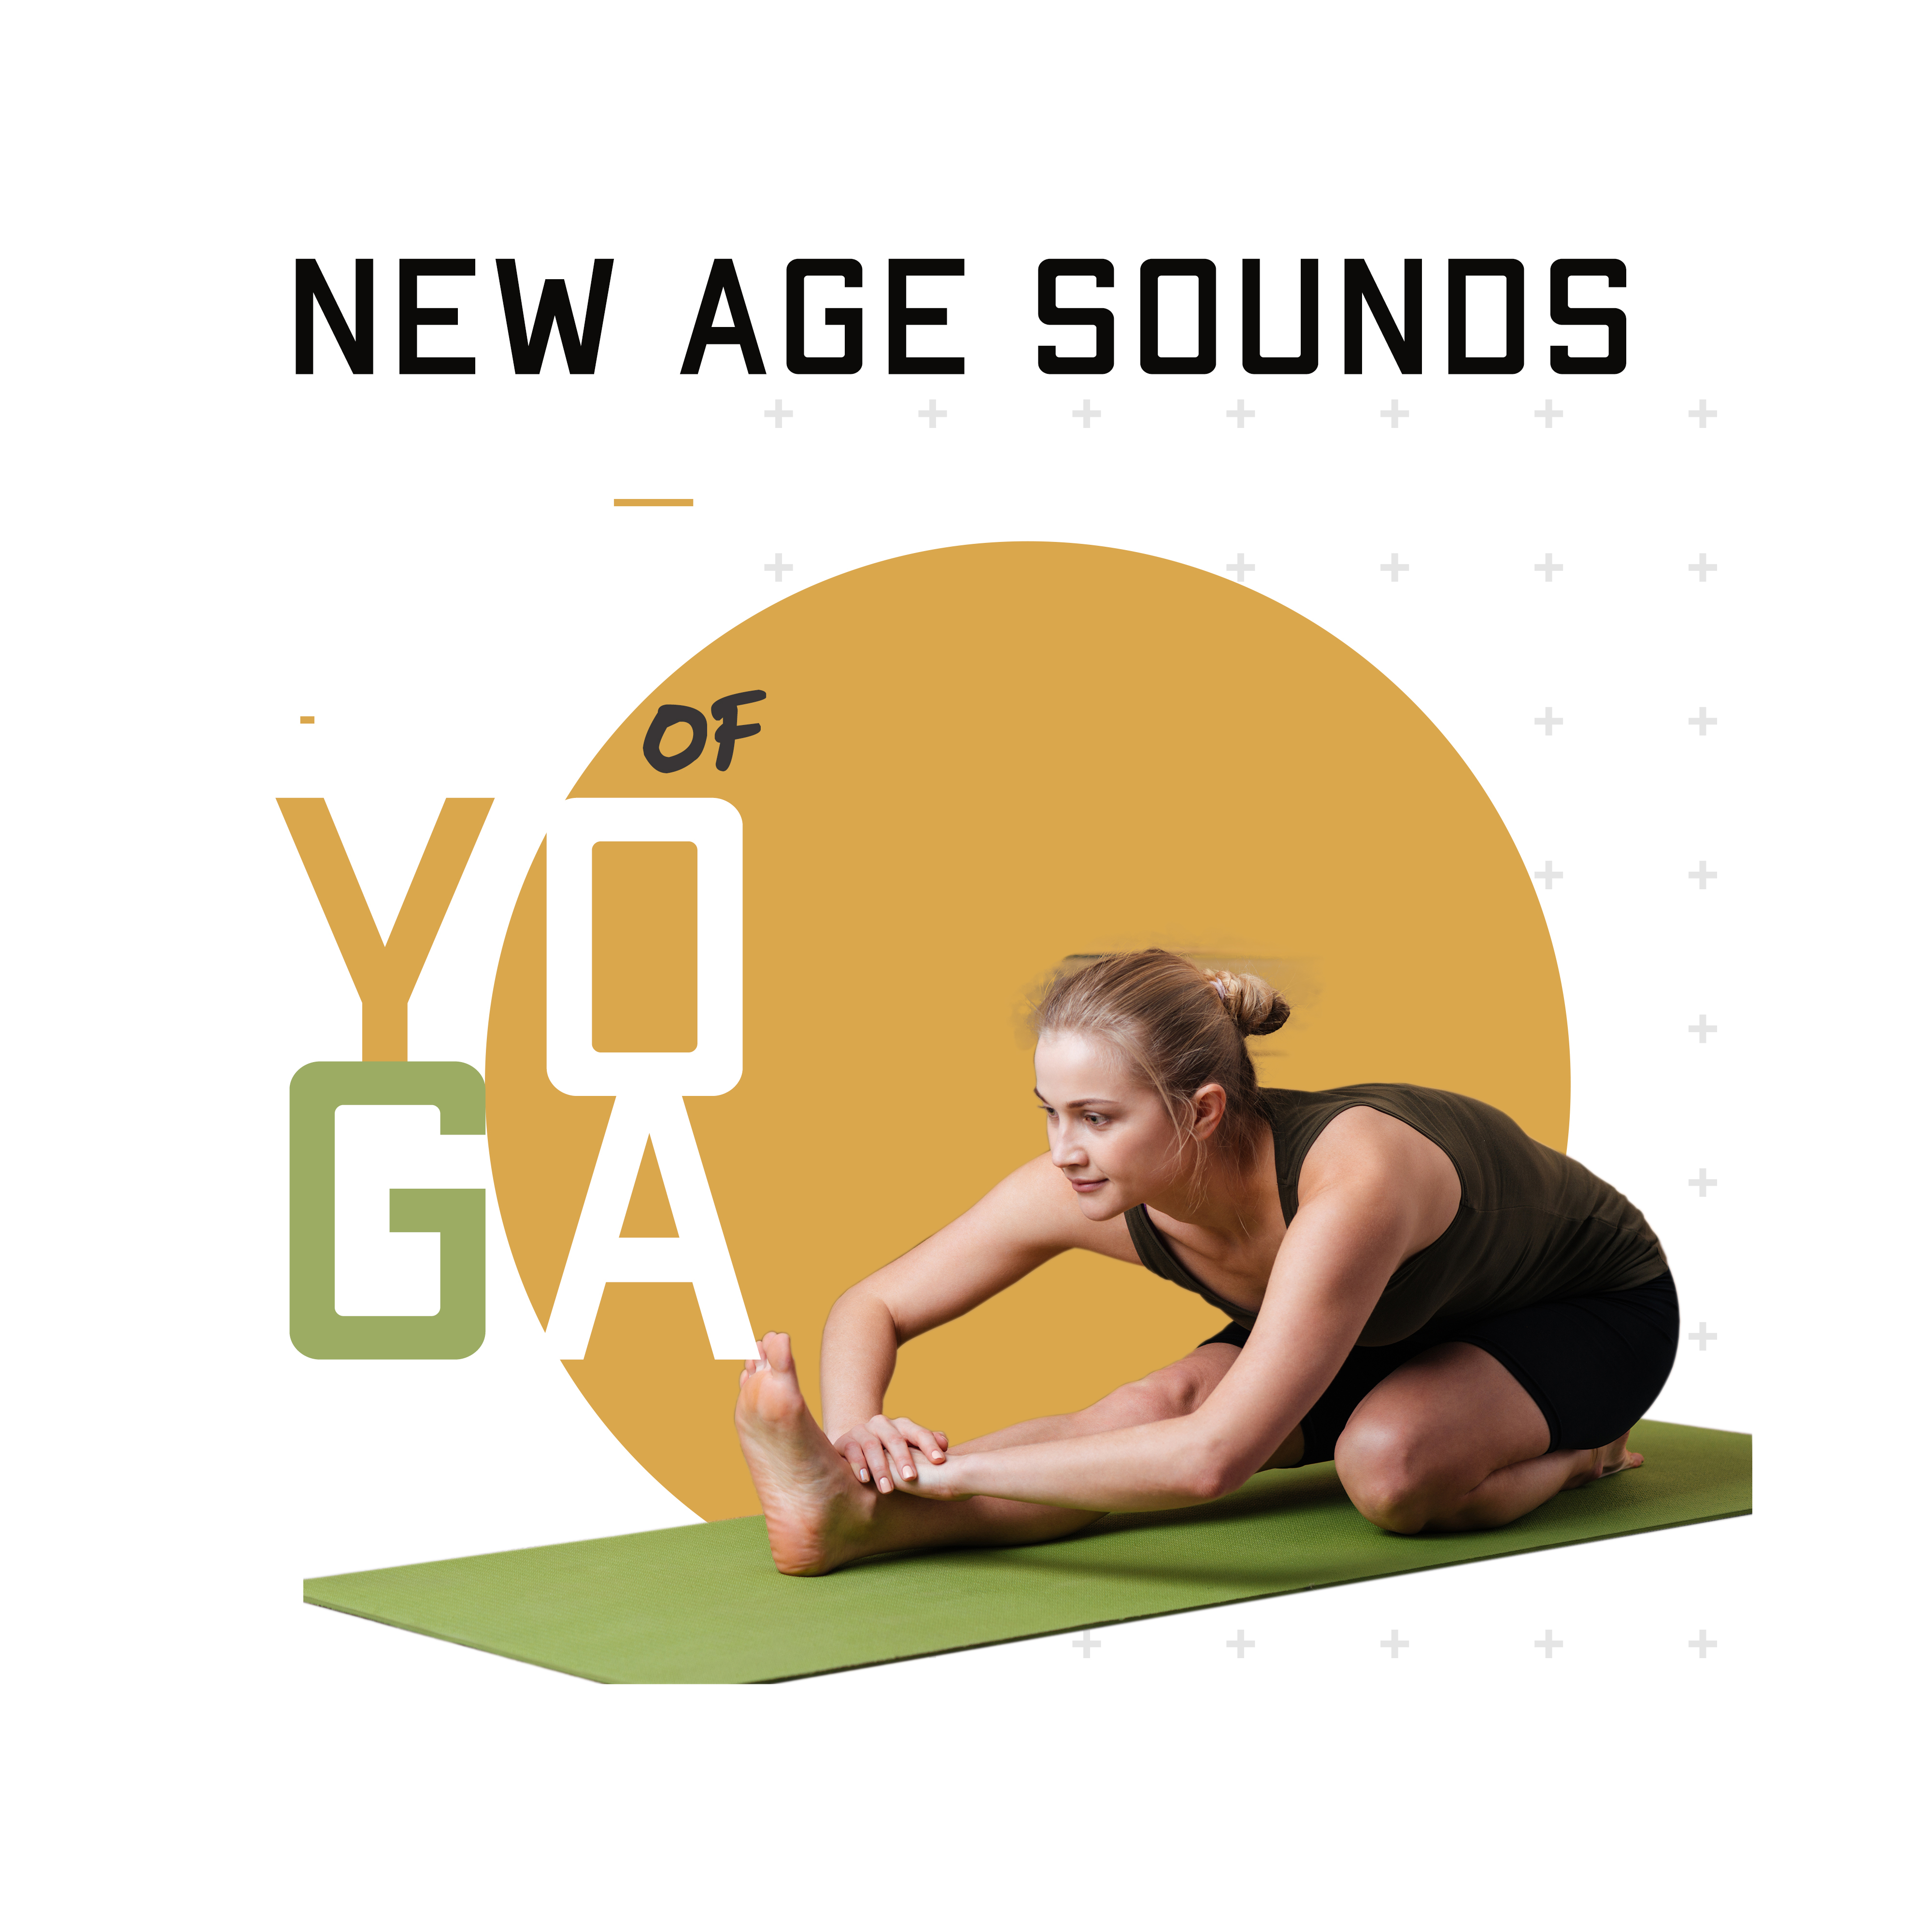 New Age Sounds of Yoga: 15 Meditation Fresh 2019 Songs for Inner Healing, Calmn & Rest Perfectly